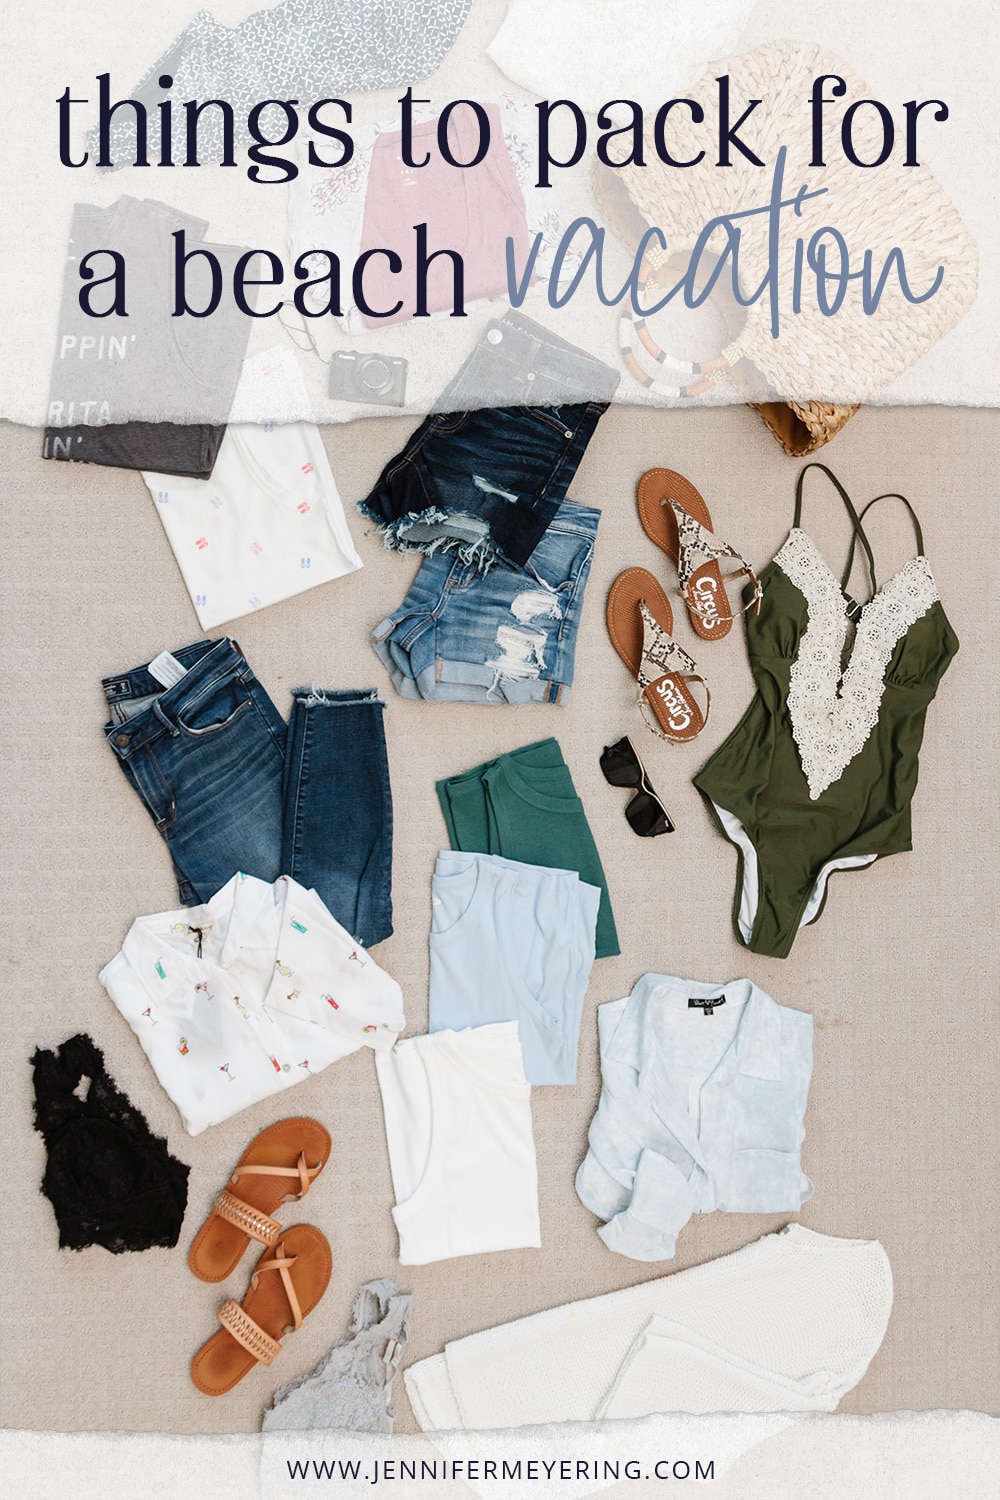 Things to Pack for a Beach Vacation